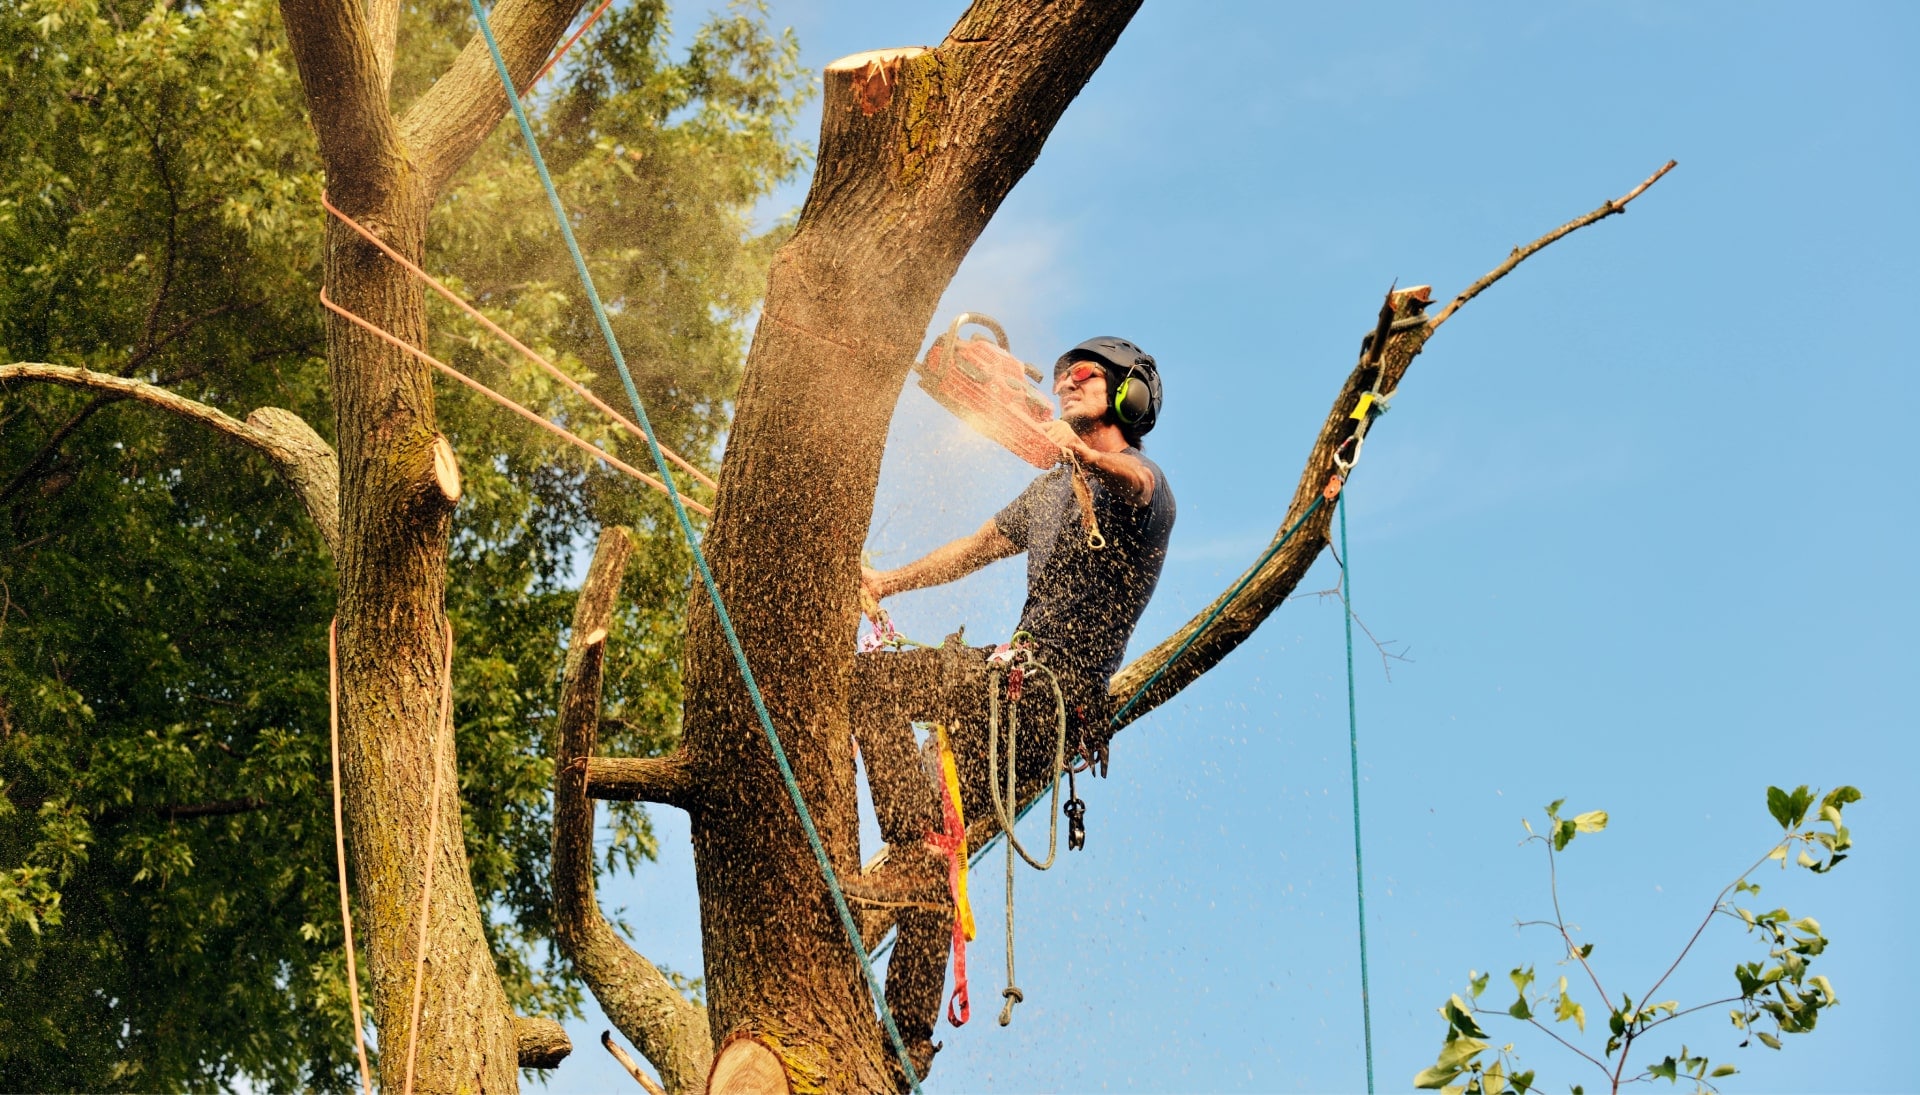 Hamden tree removal experts solve tree issues.